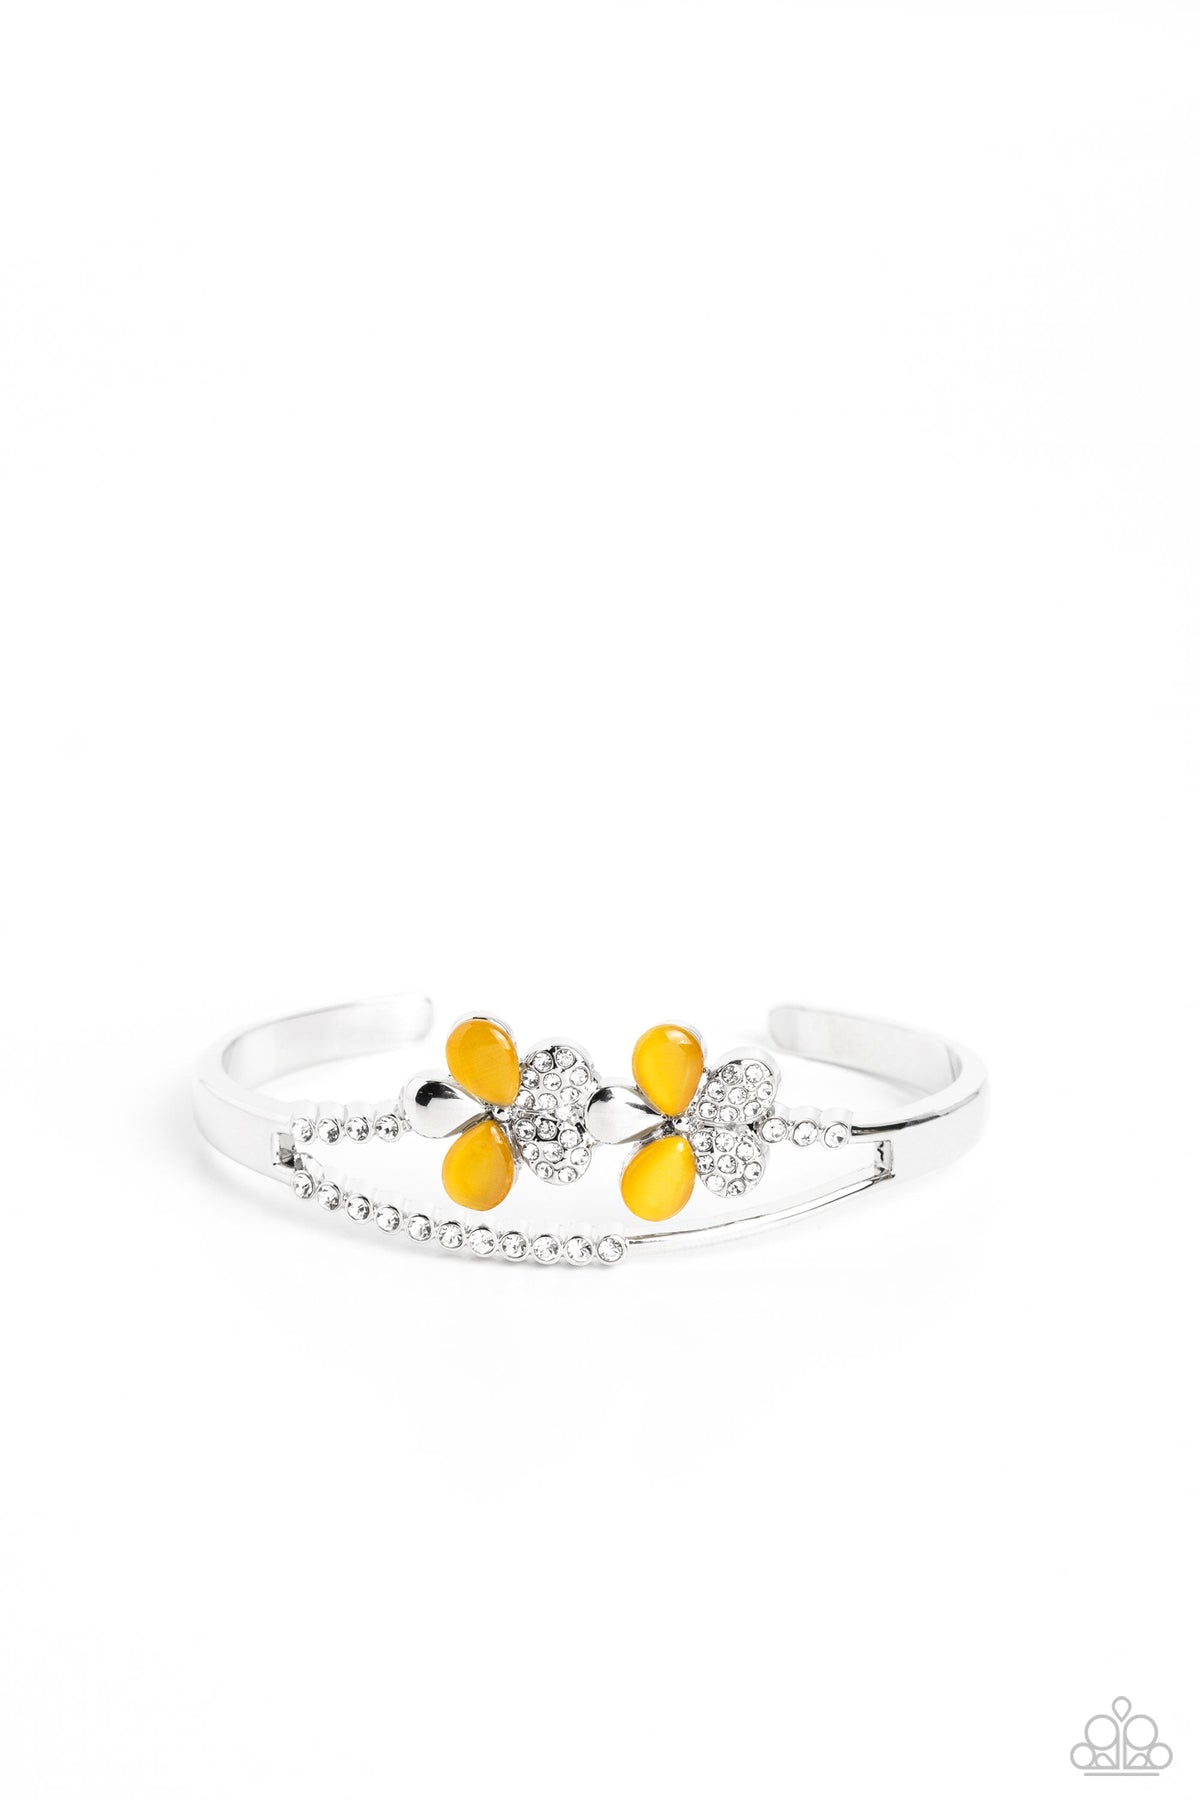 Broadway Stage Yellow Cat&#39;s Eye Stone Floral Cuff Bracelet- lightbox - CarasShop.com - $5 Jewelry by Cara Jewels